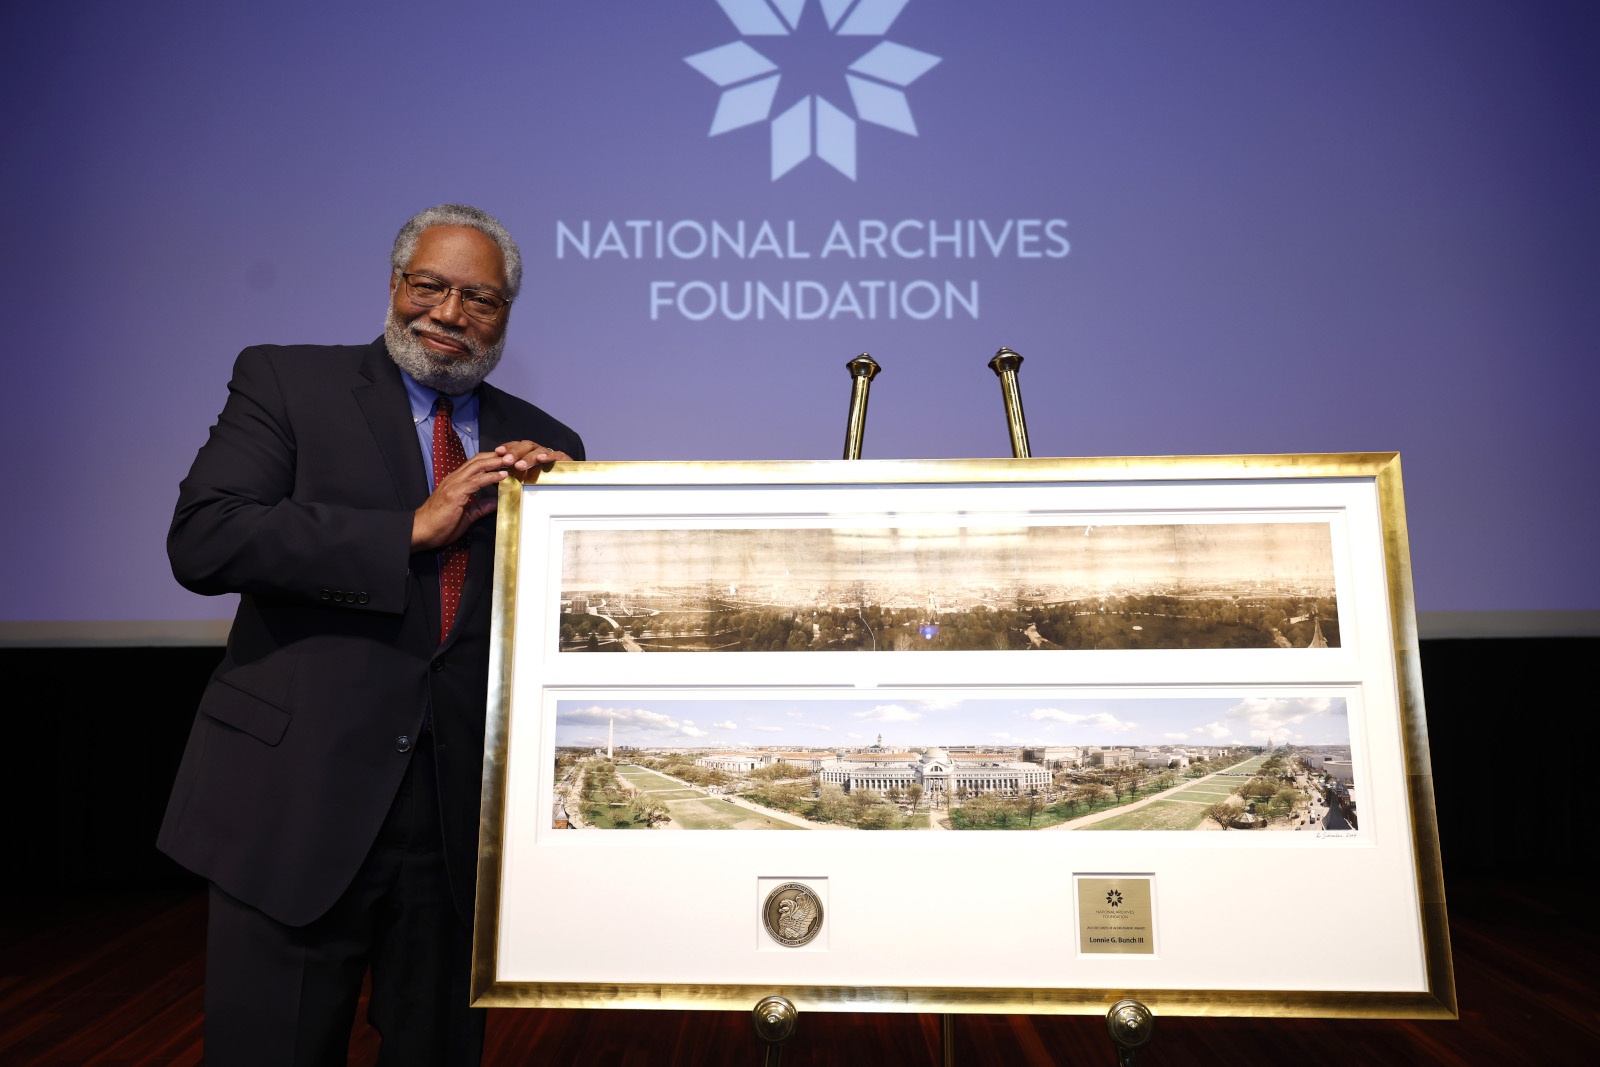 Lonnie Bunch and the Records of Achievement Award